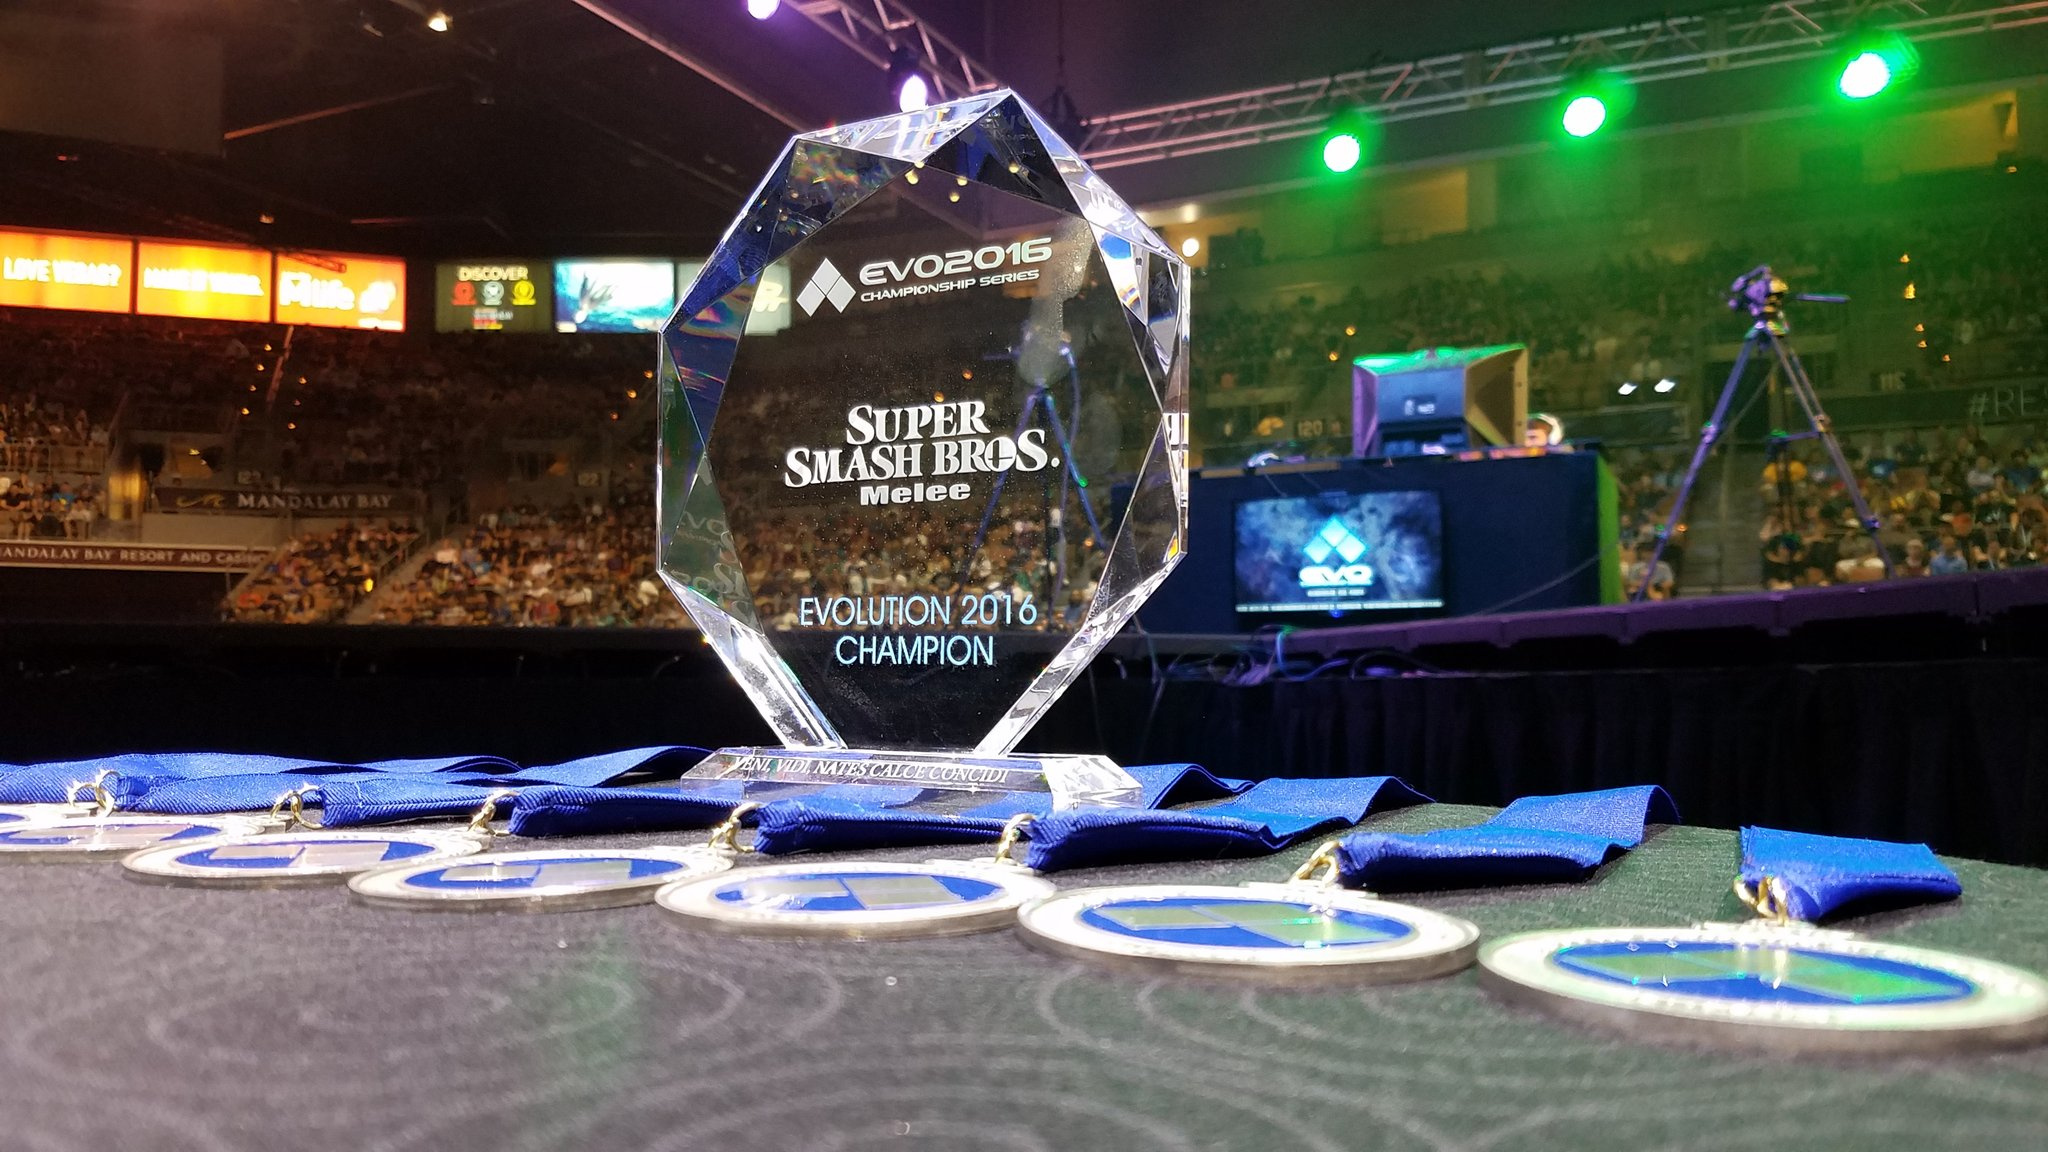 Video Catch Up With the Smash Bros. and Pokkén Tournament Grand Finals